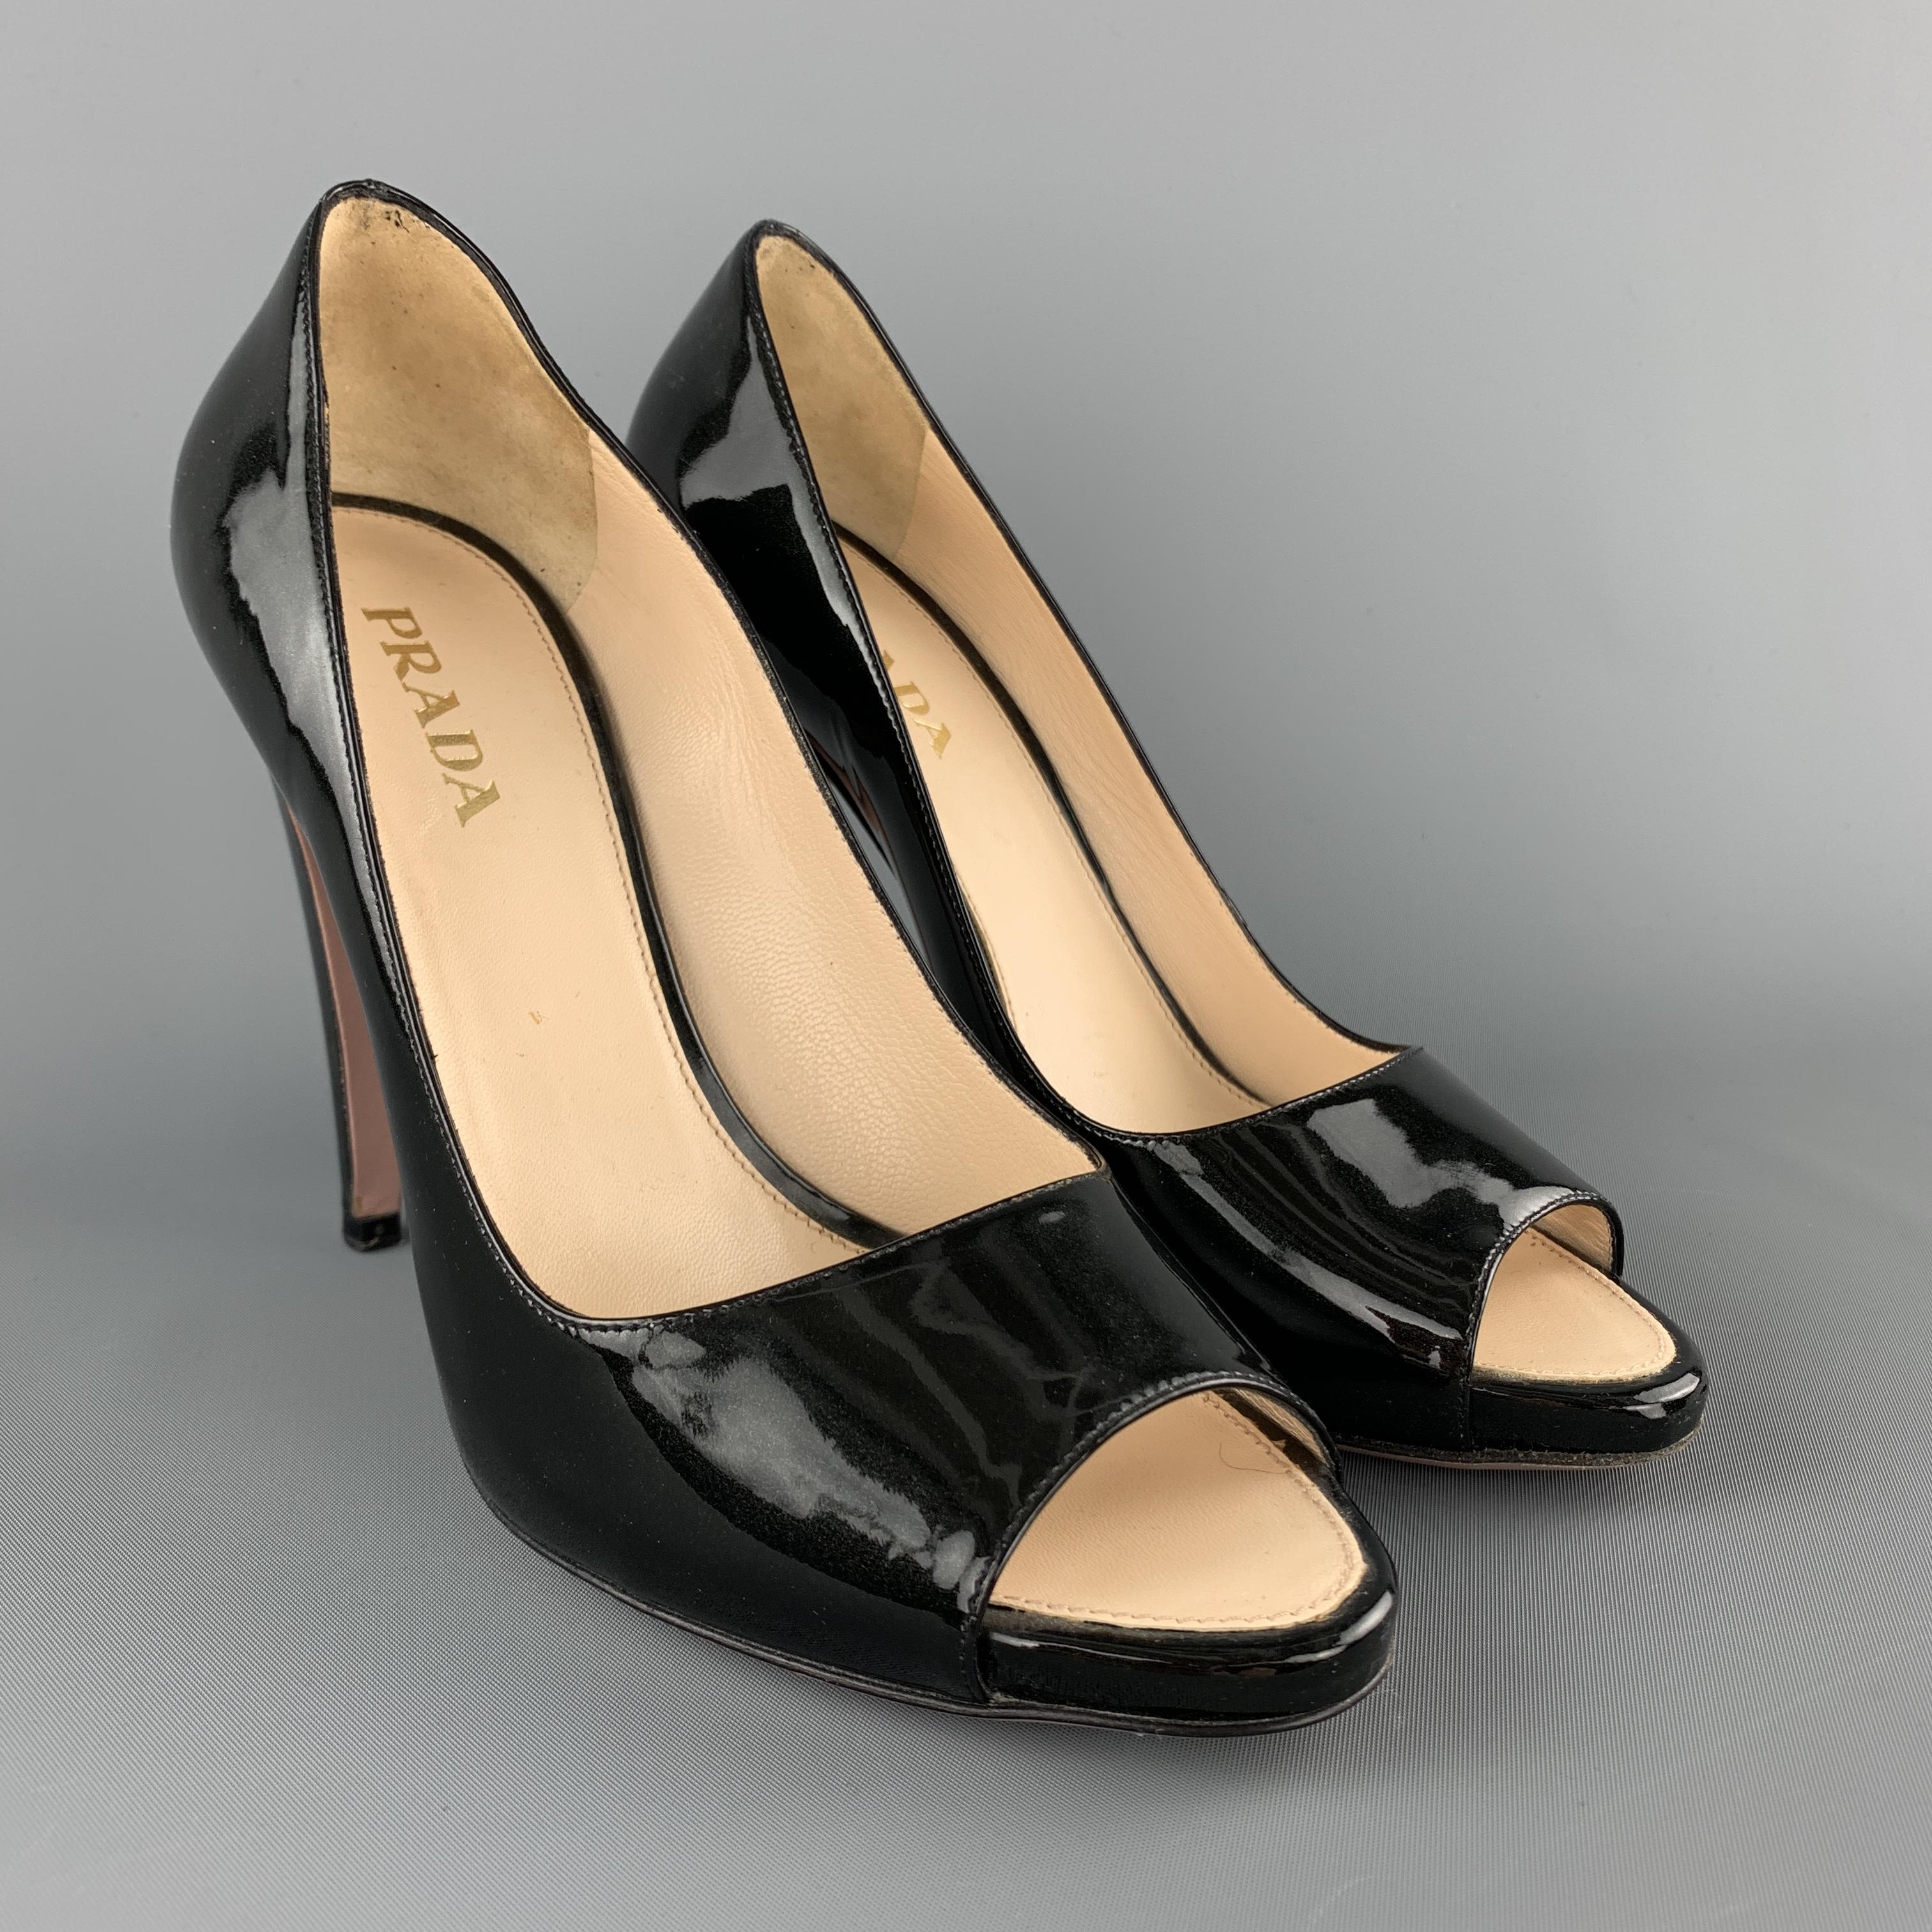 PRADA pumps come in black sparkle patent leather with a peep toe and covered heel. Made in Italy.

Excellent Pre-Owned Condition.
Marked: IT 39 
Original Retail Price: $650.00
 
Measurements:

Heel: 4.5 in.
Platform: 0.5 in.